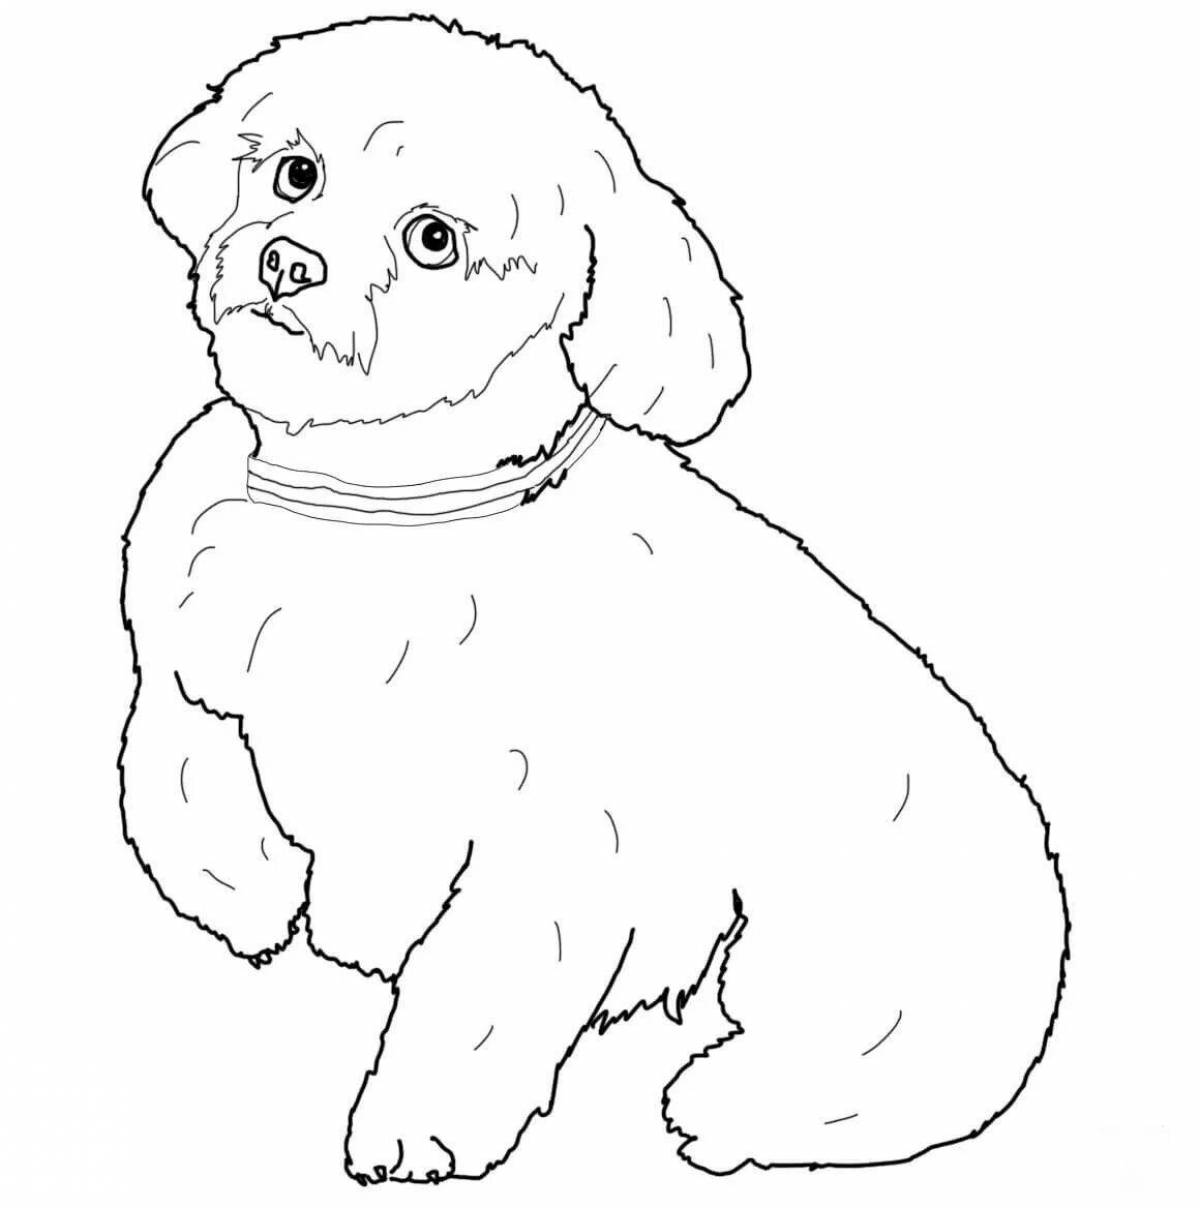 Fluffy coloring pages of dogs of different breeds